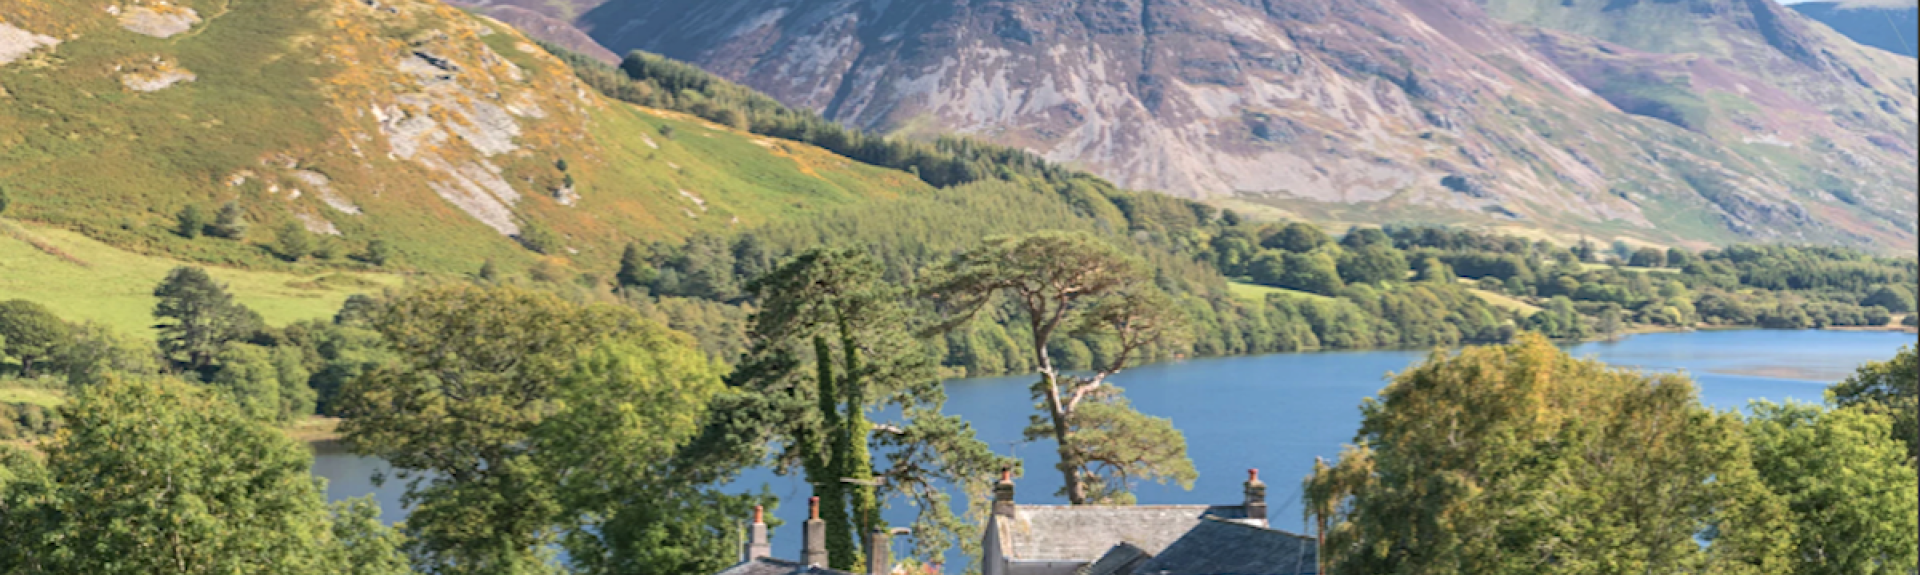 A holiday cottage overlooks a large lake in front of tall Lake District Fells.